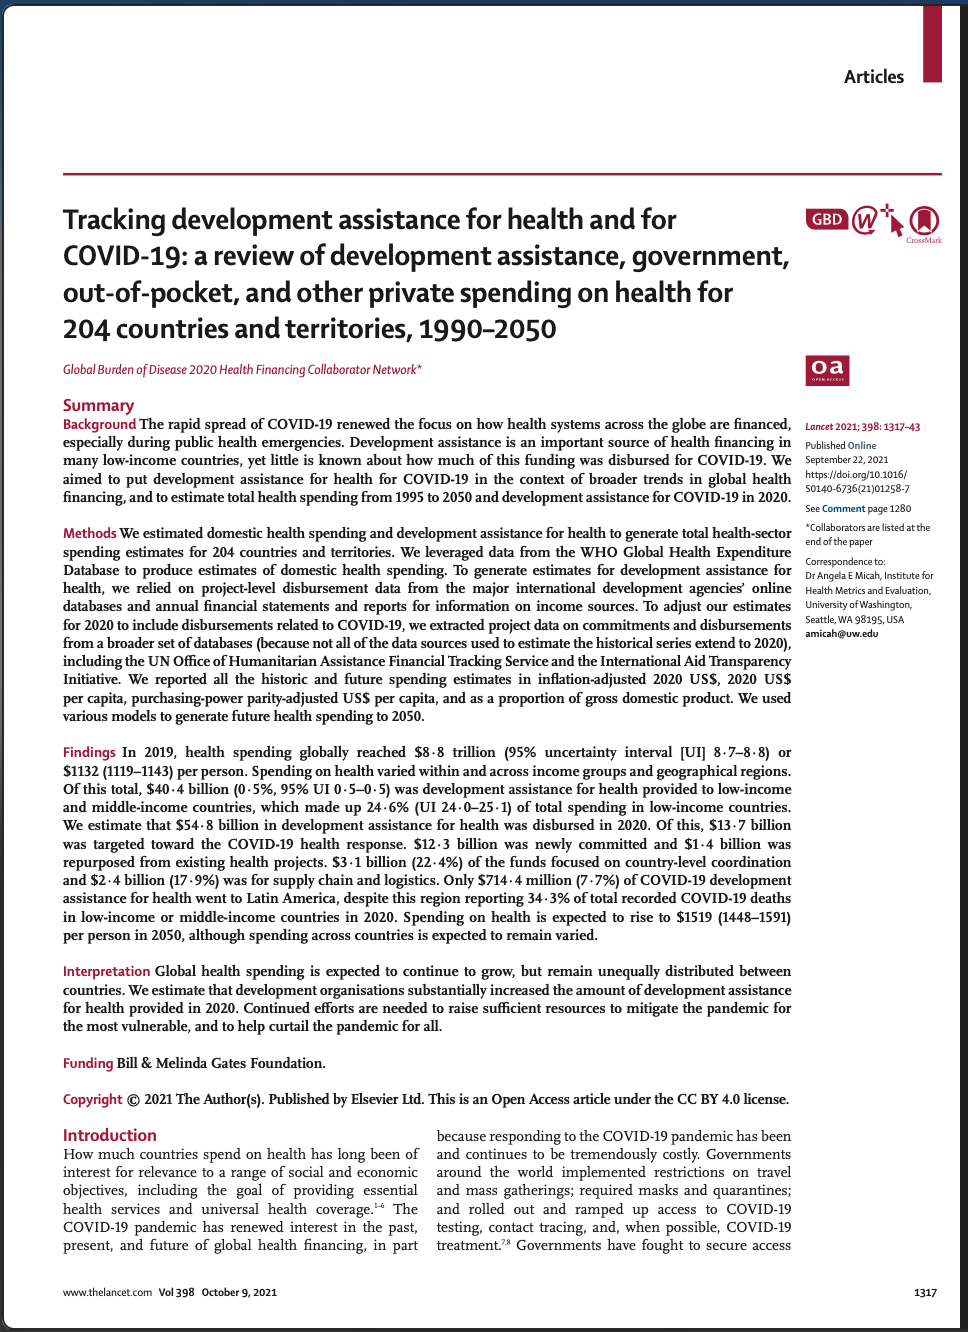 Tracking Development Assistance for Health and for COVID-19: A Review of Development Assistance, Government, Out-of-pocket, and Other Private Spending on Health for 204 Countries and Territories 1990–2050 (The Lancet 2021)